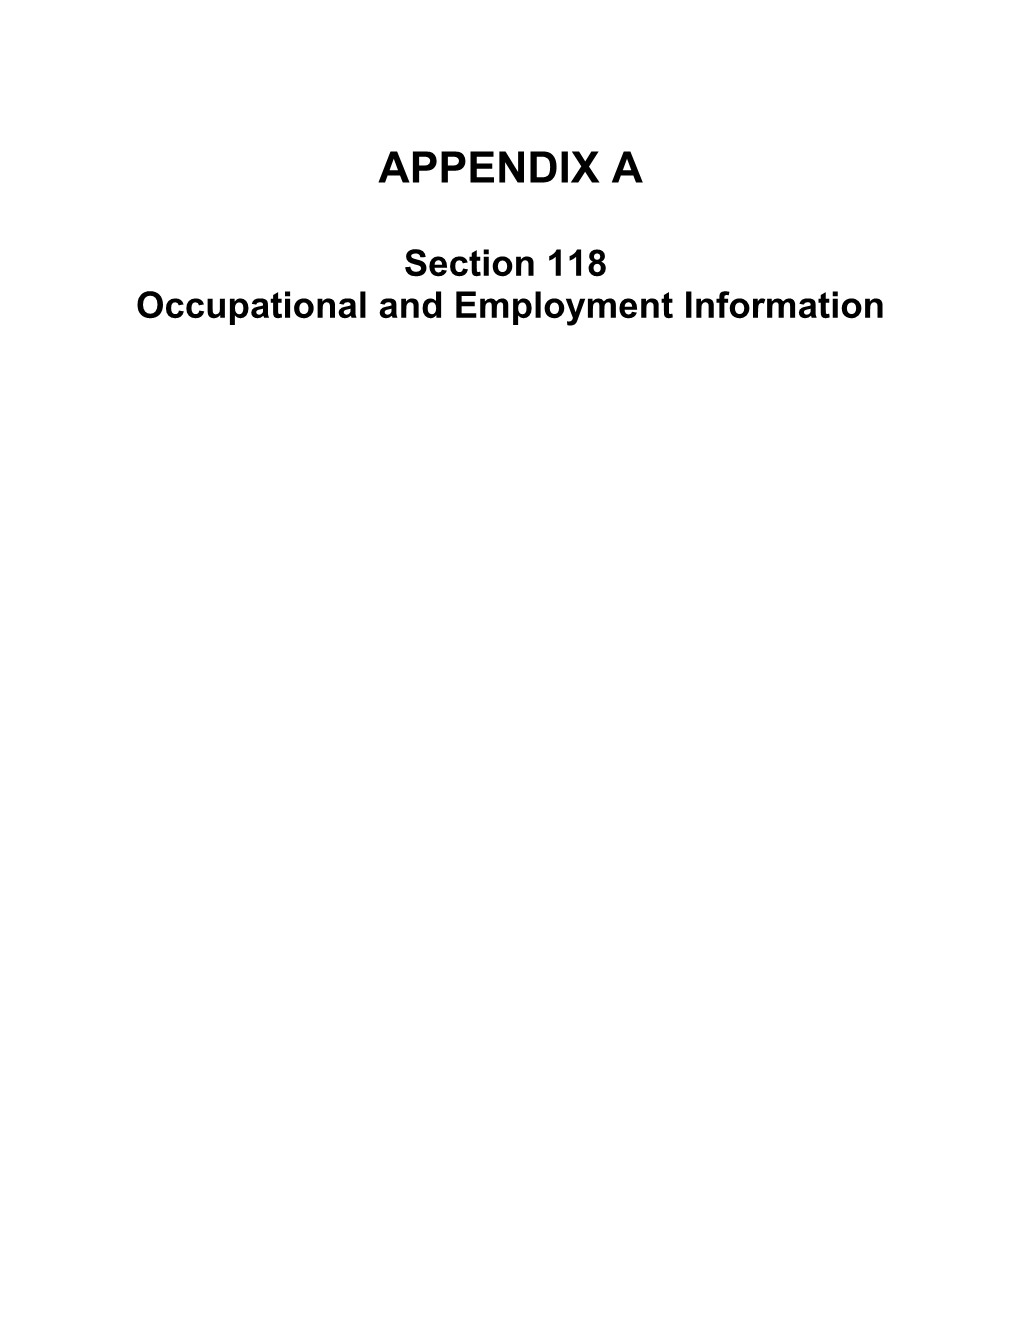 Occupational and Employment Information